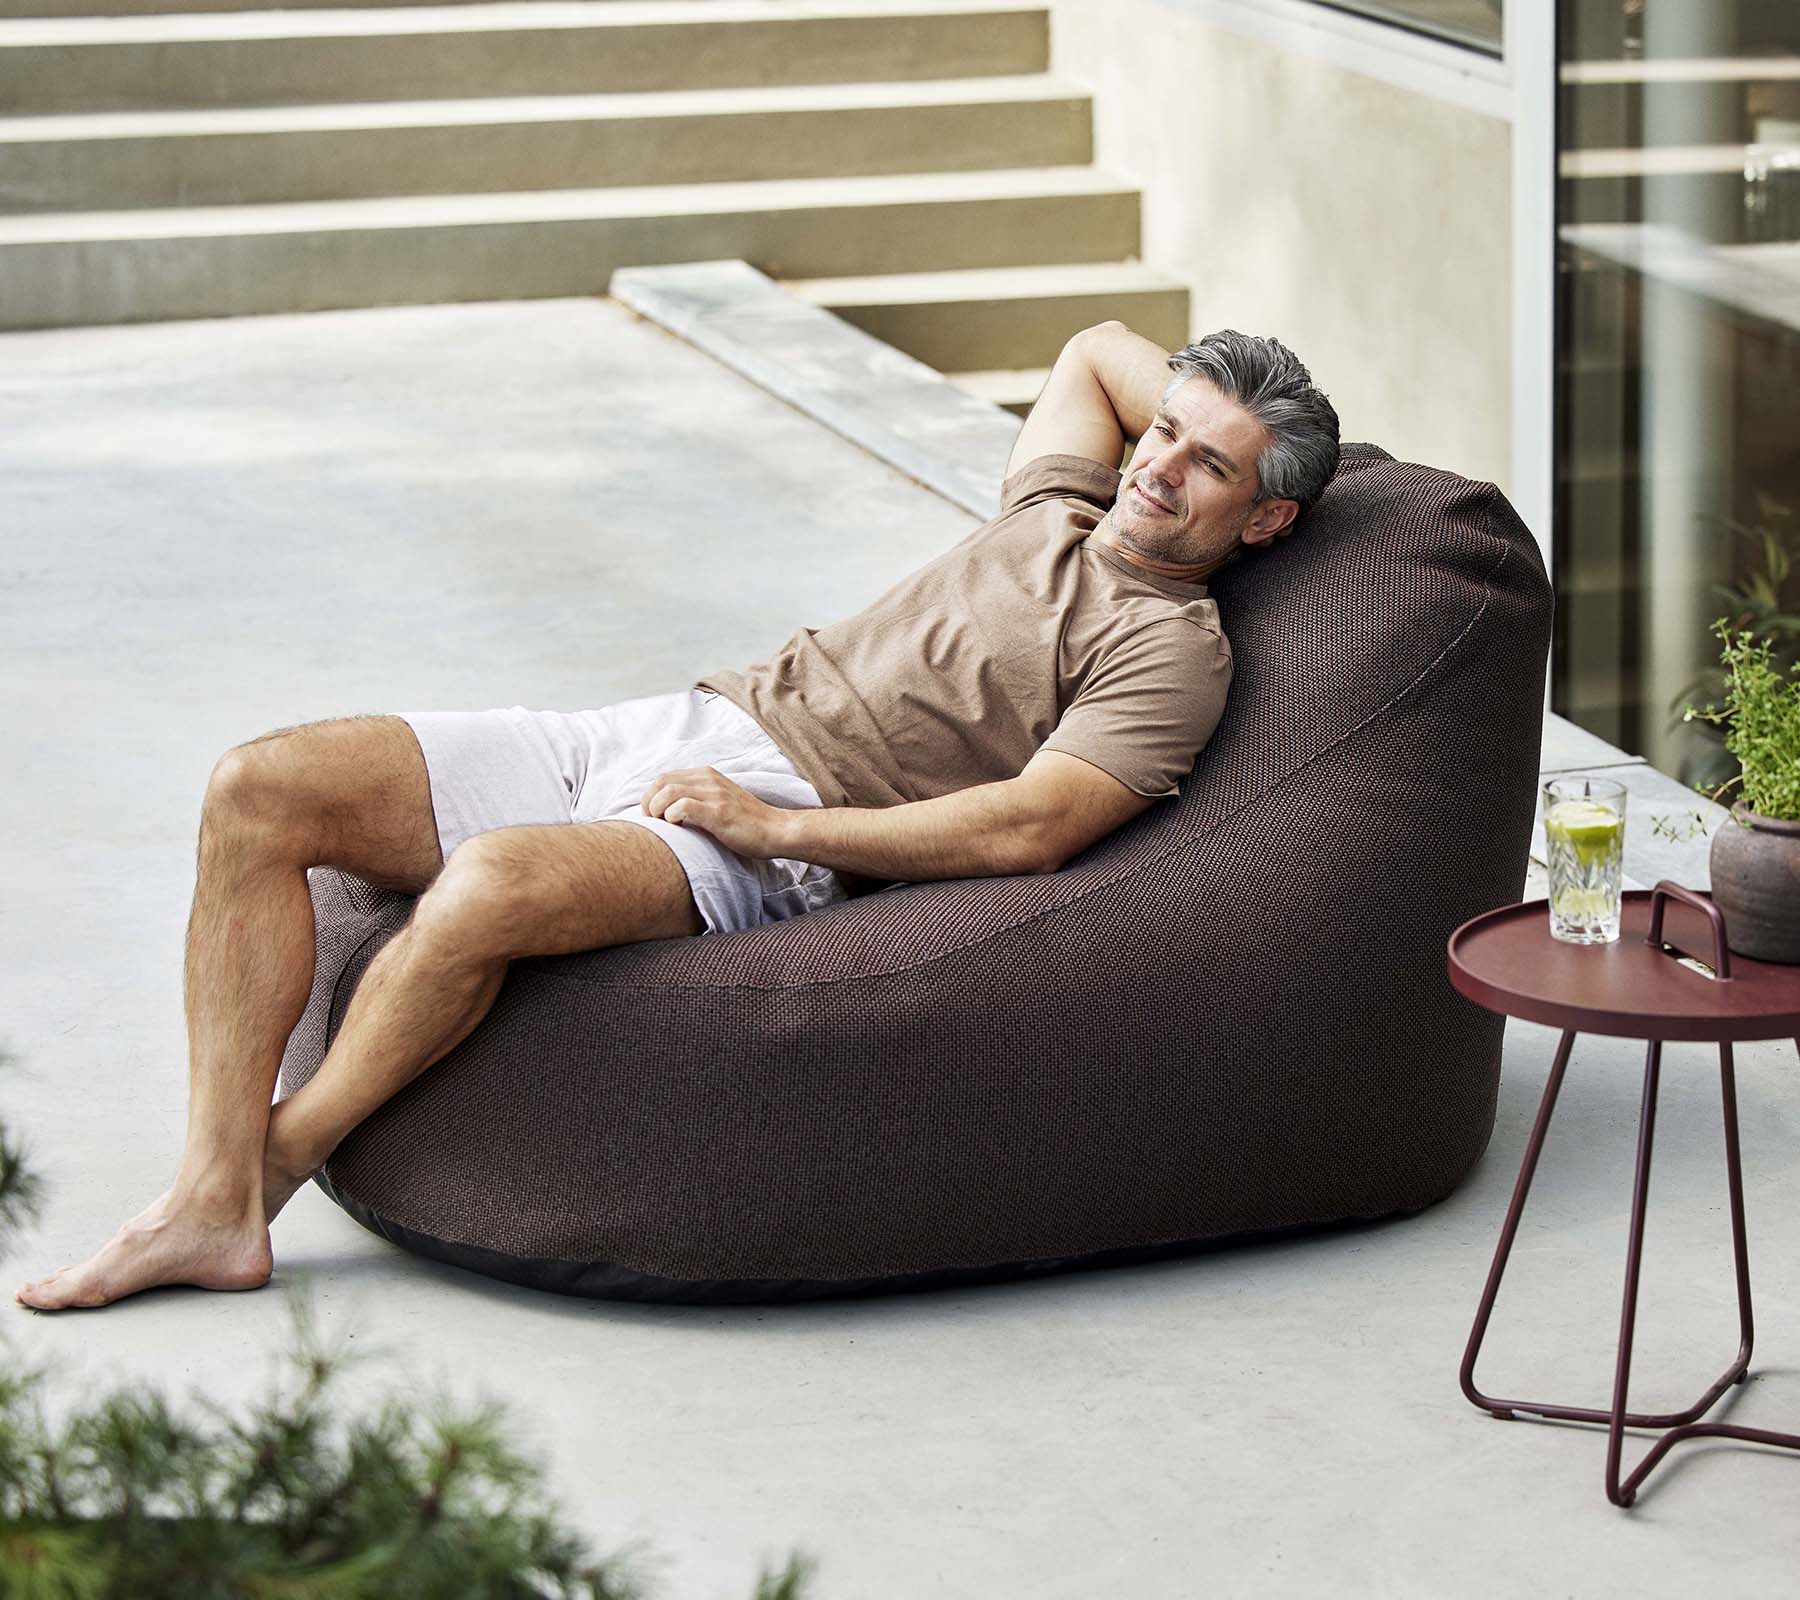 Cane-line Cozy bean bag chair - see selection –